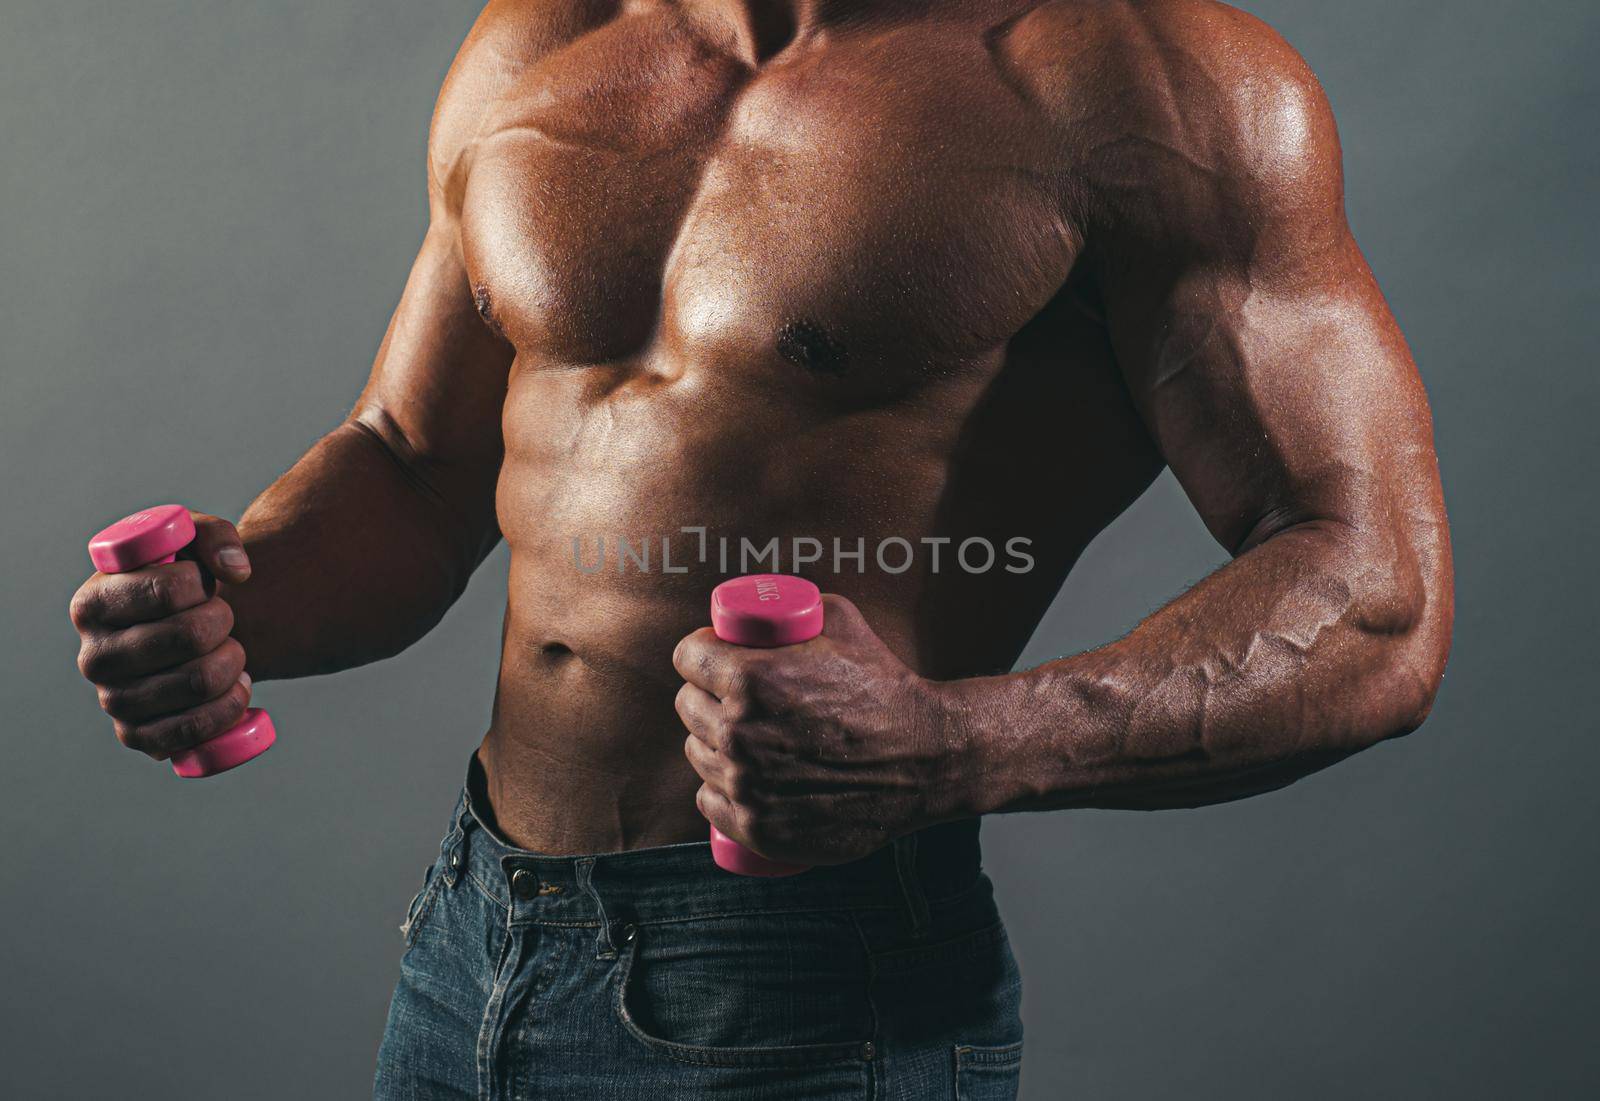 Muscular sexy fitness male body. Man posing shirtless on gray background. Athletic young man with naked torso with dumbbells. Strength and motivation gay concept. Fitness with small dumbbells. by Tverdokhlib